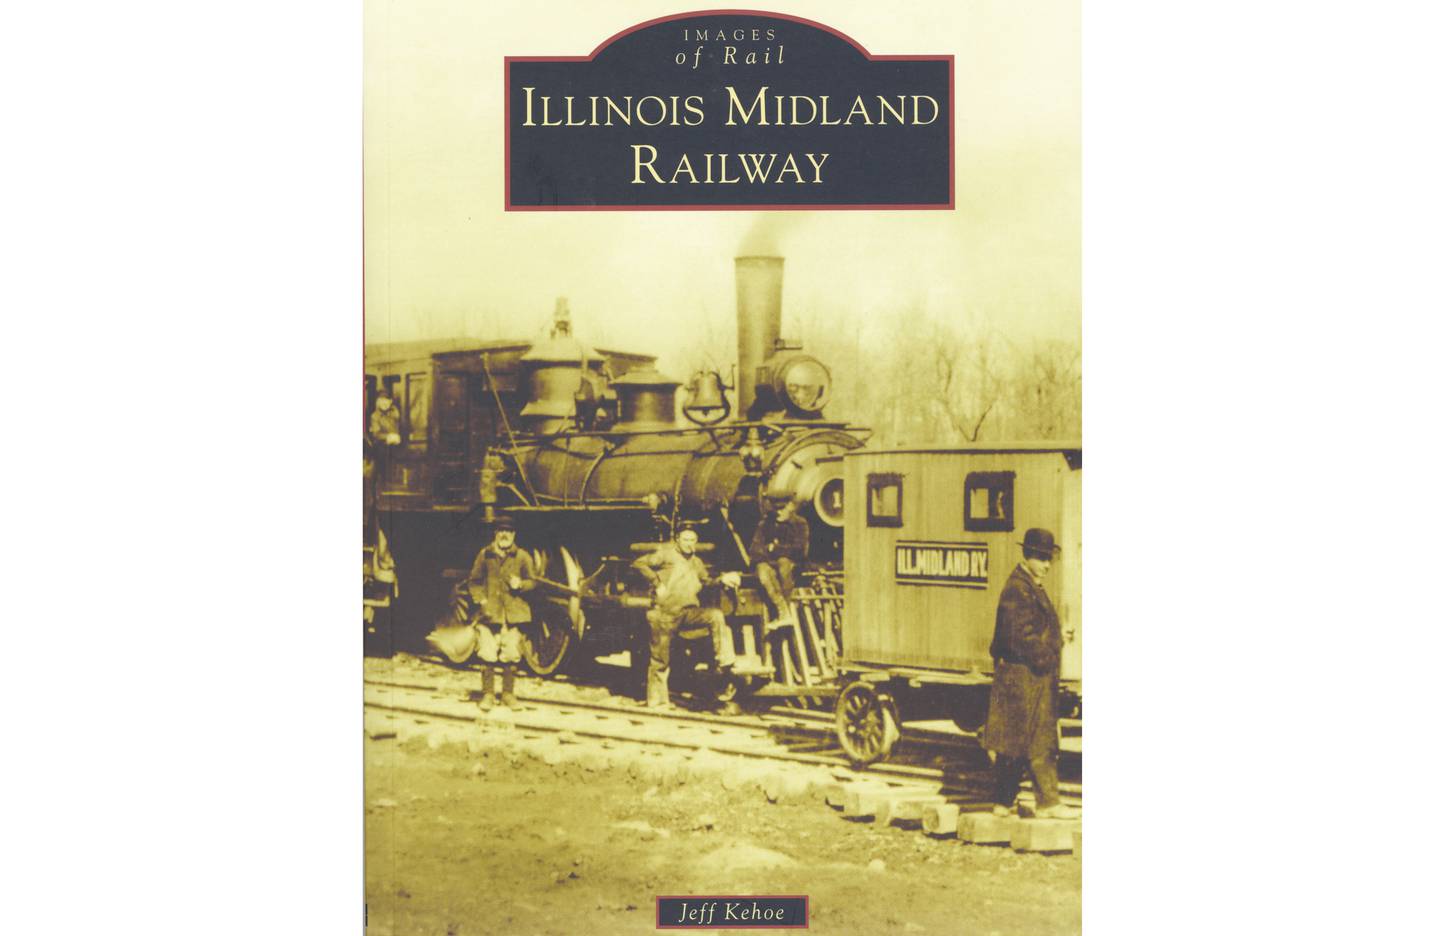 Cover of Jeff Kehoe's new book on the Illinois Midland Railway. (Photo provided)